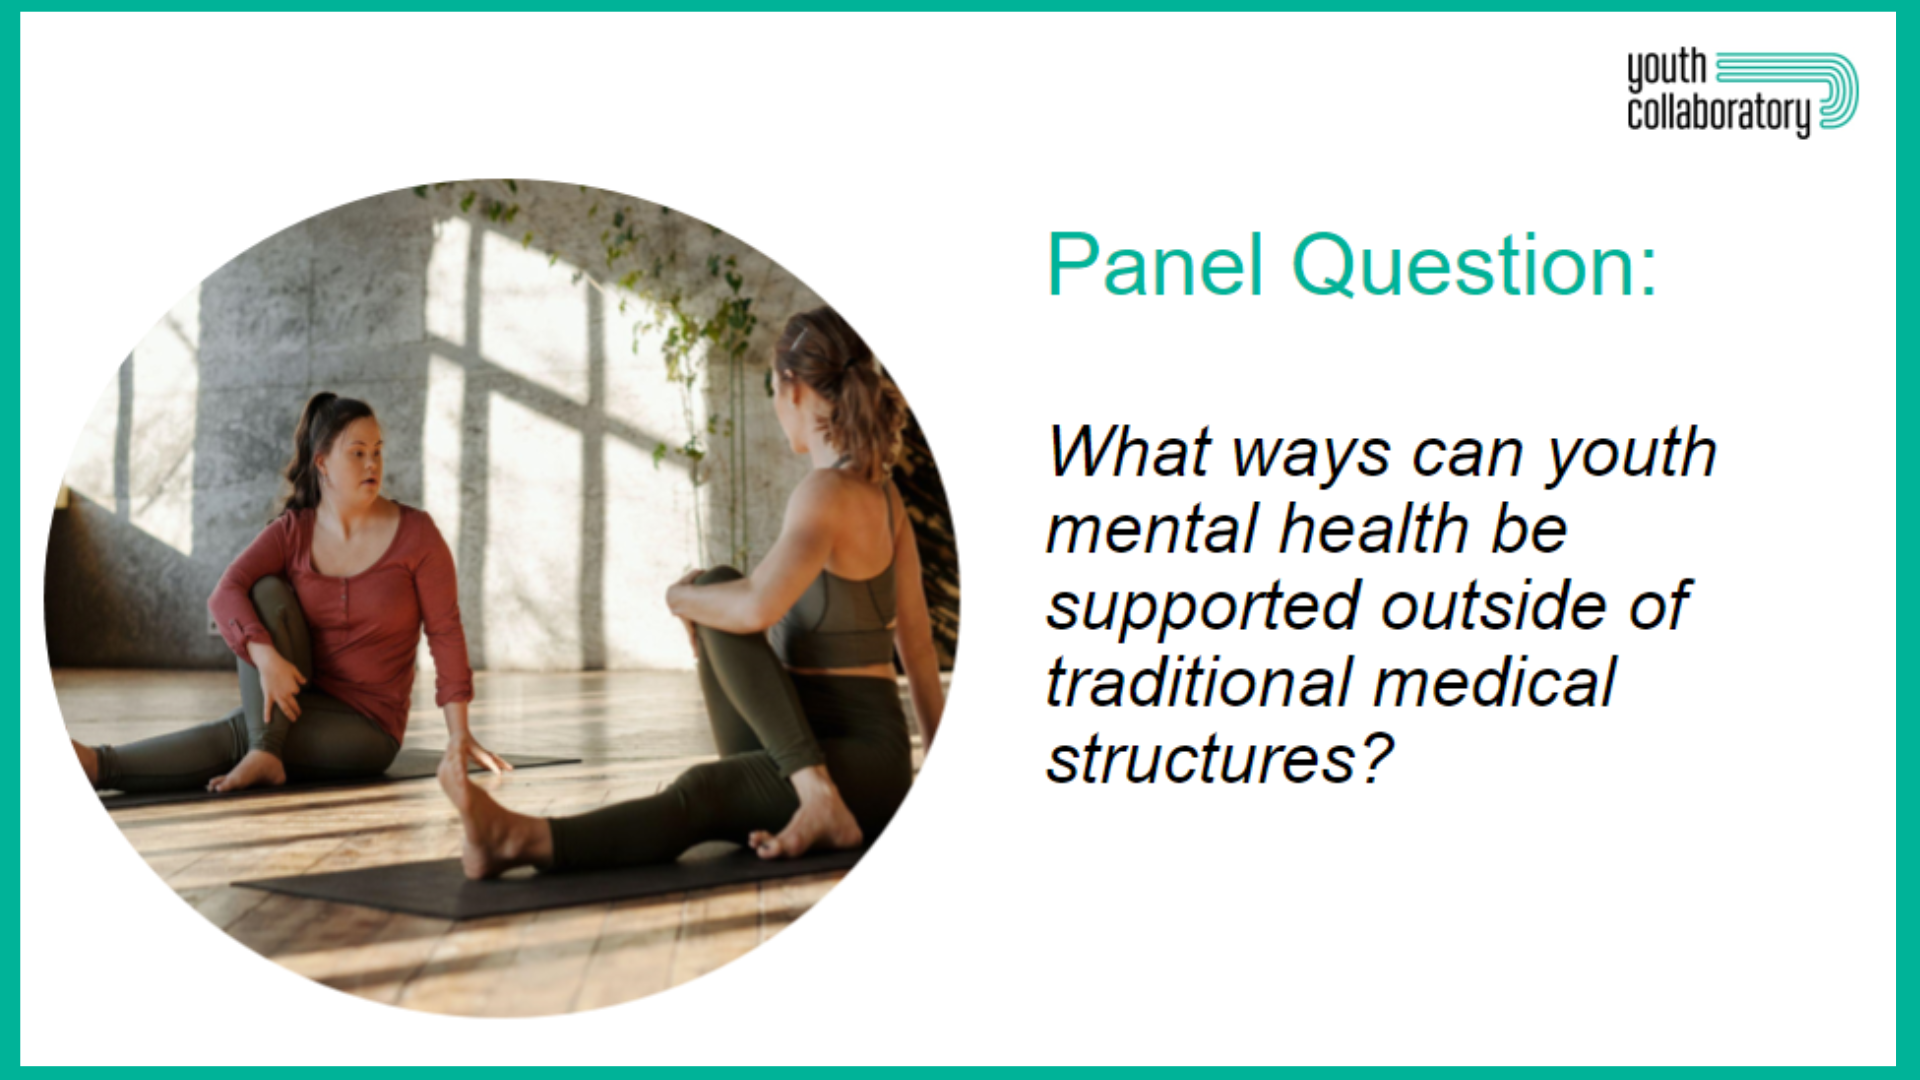 Panel Question: What ways can youth mental health be supported outside of traditional medical structures?